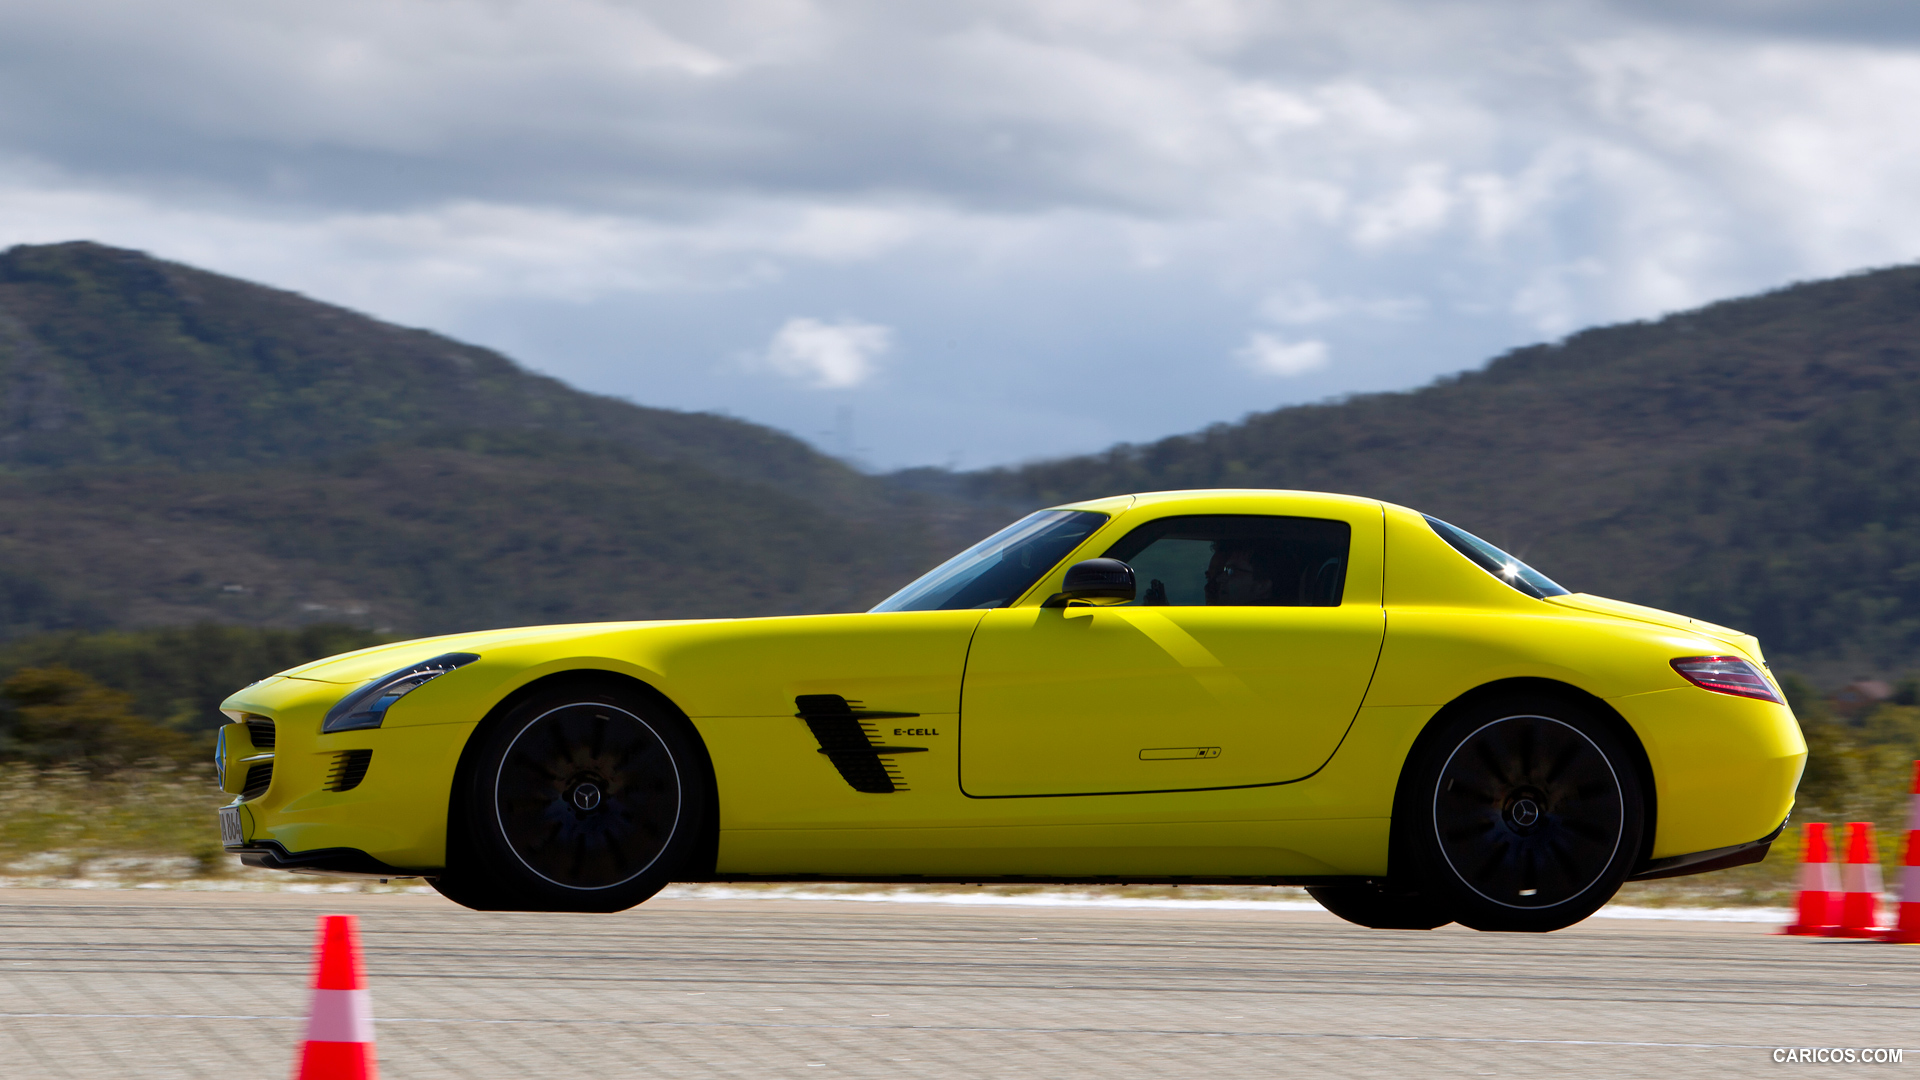 Mercedes-Benz SLS AMG E-CELL Concept  - Side, #12 of 60